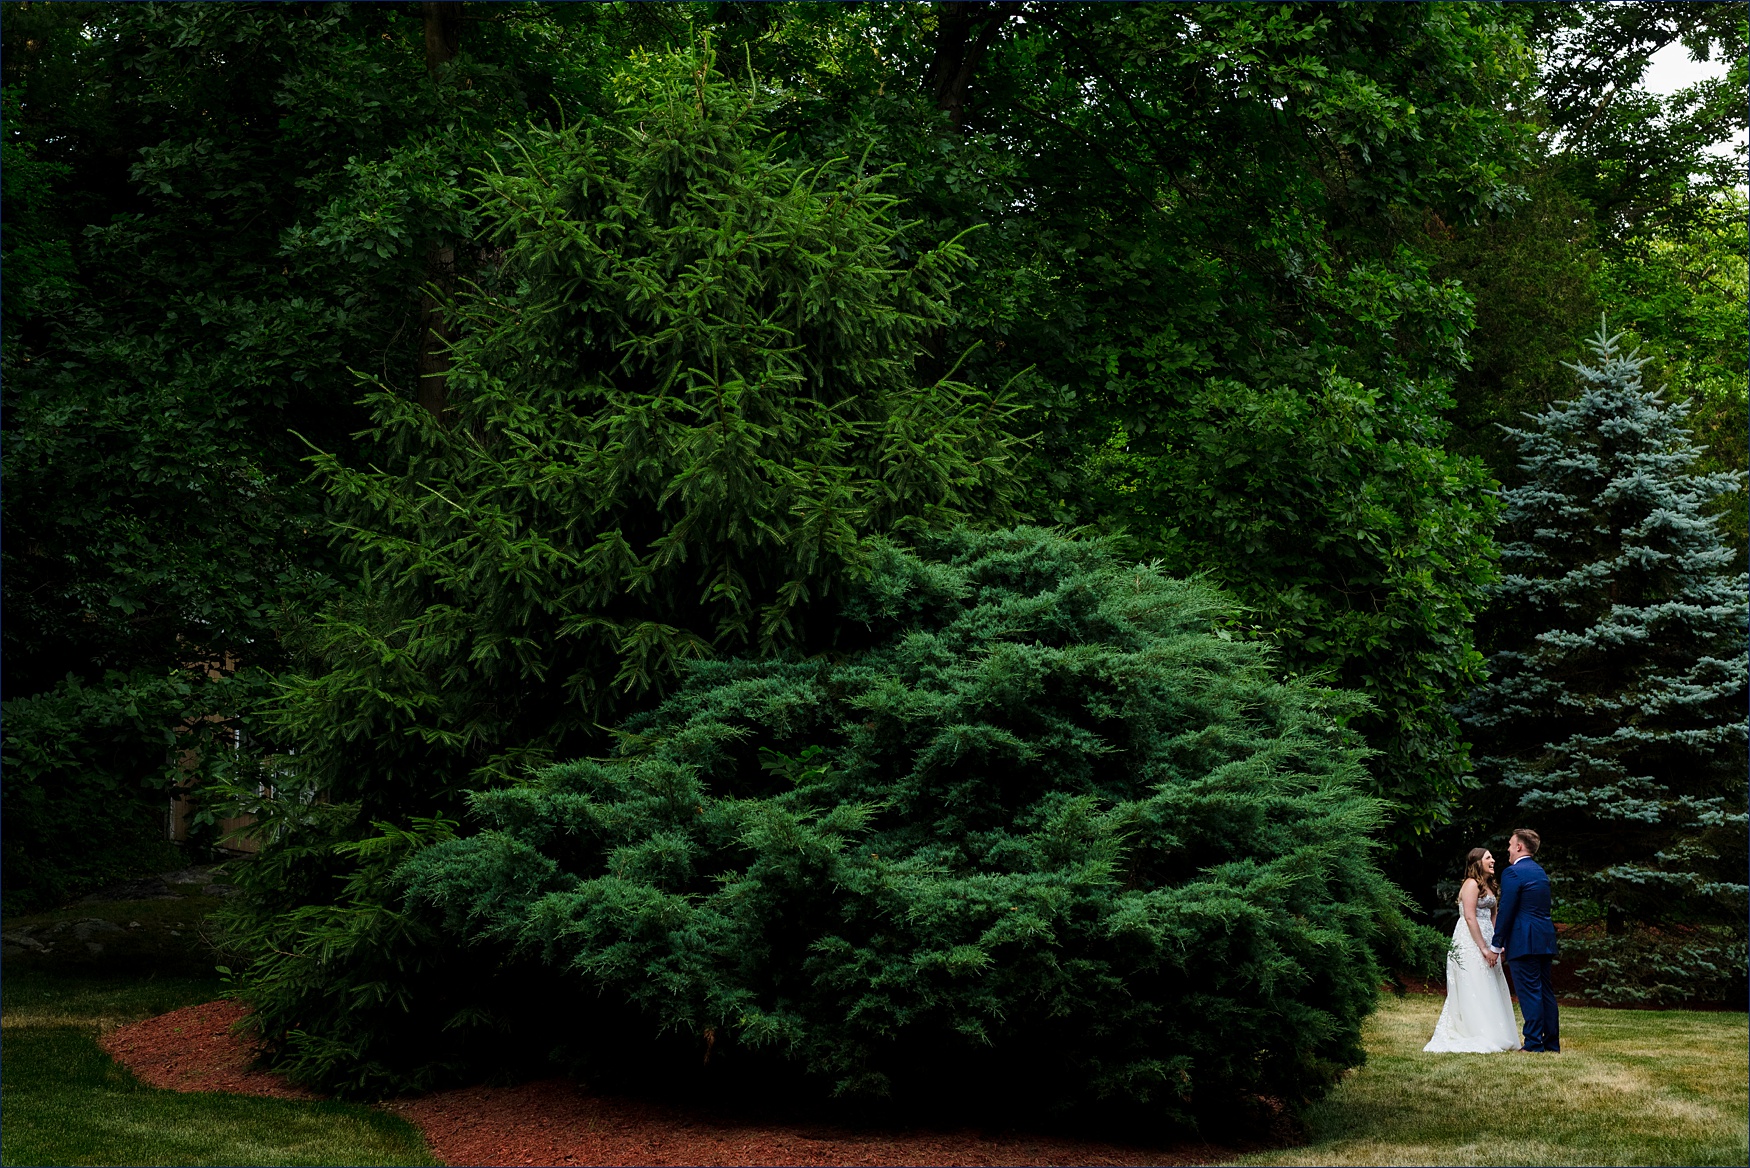 A moment along among the tall trees for the bride and groom